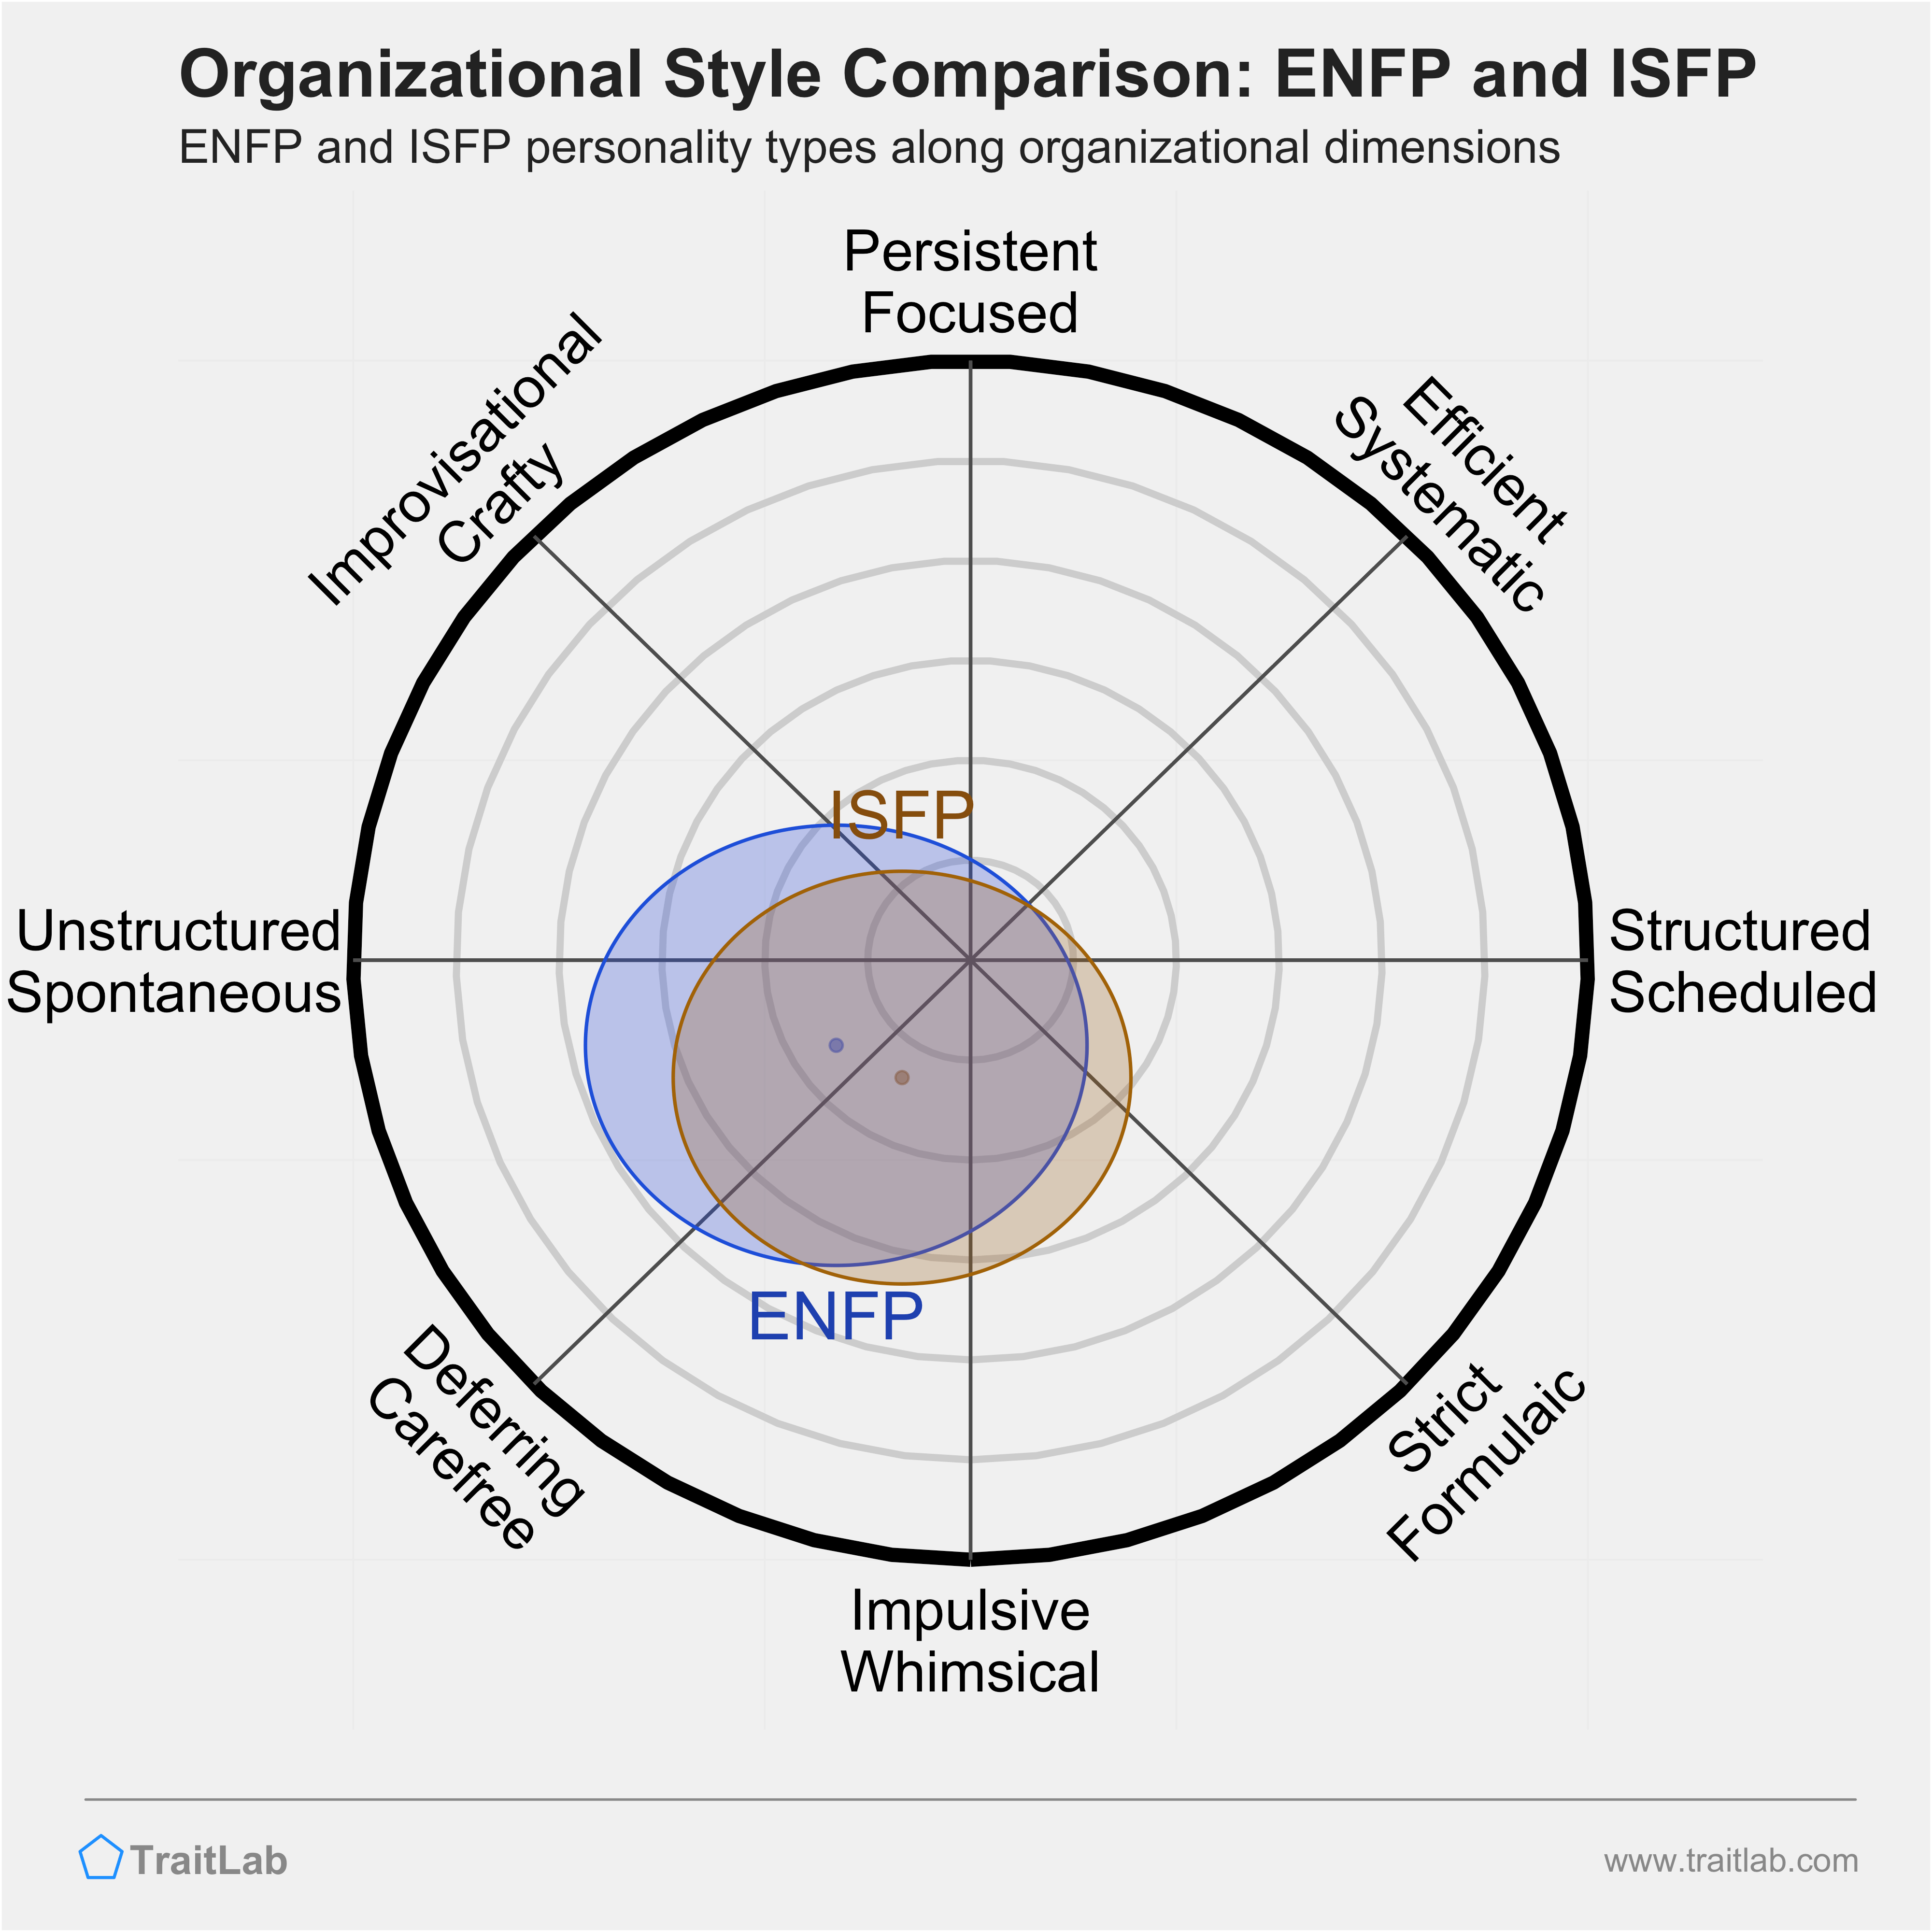 ENFP and ISFP comparison across organizational dimensions